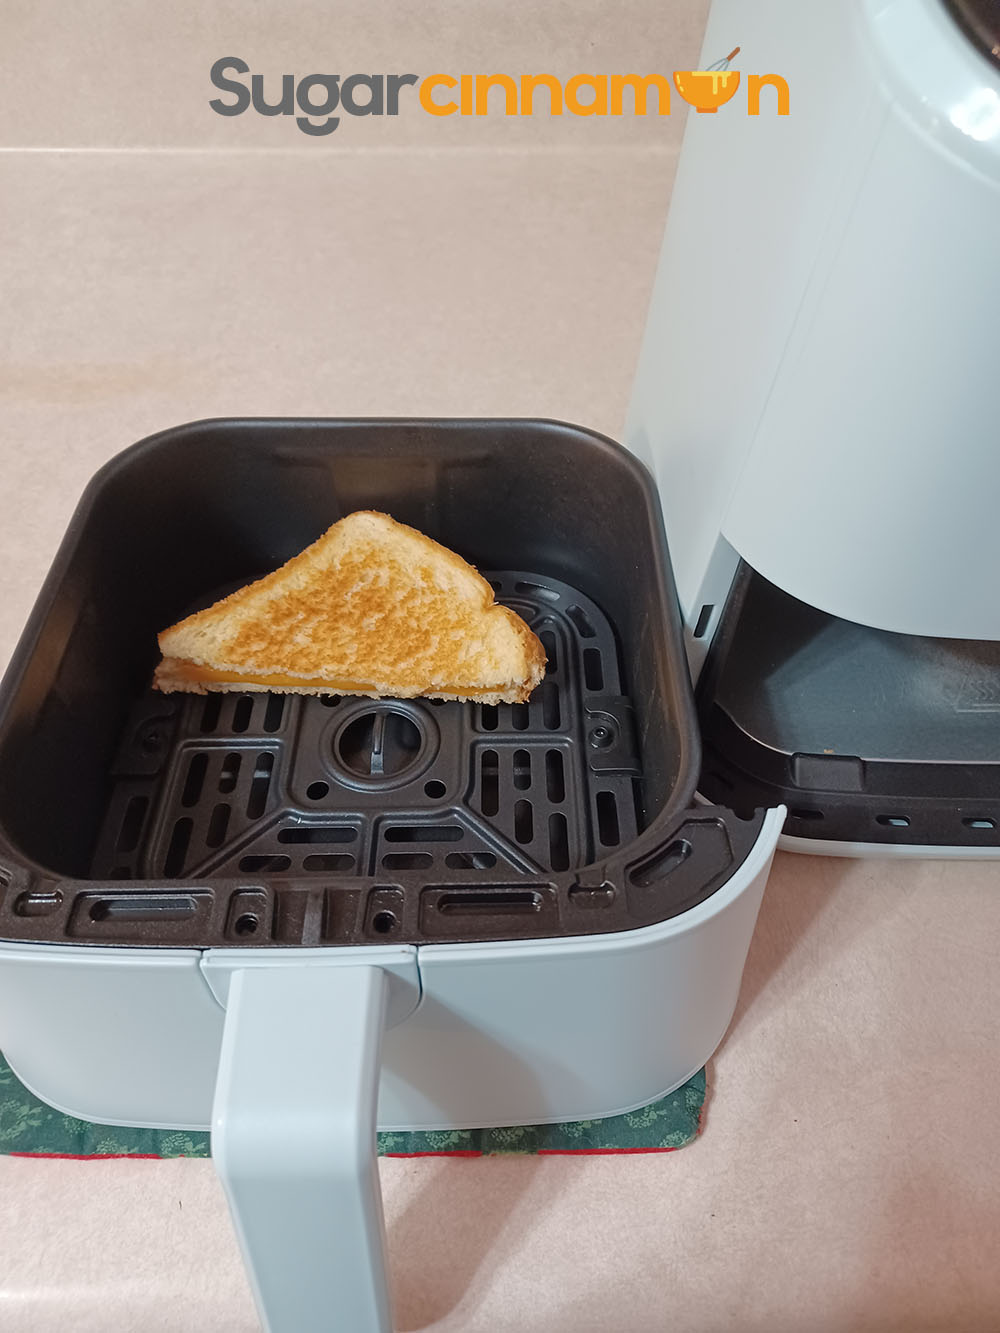 Reheating Sandwich In The Air Fryer